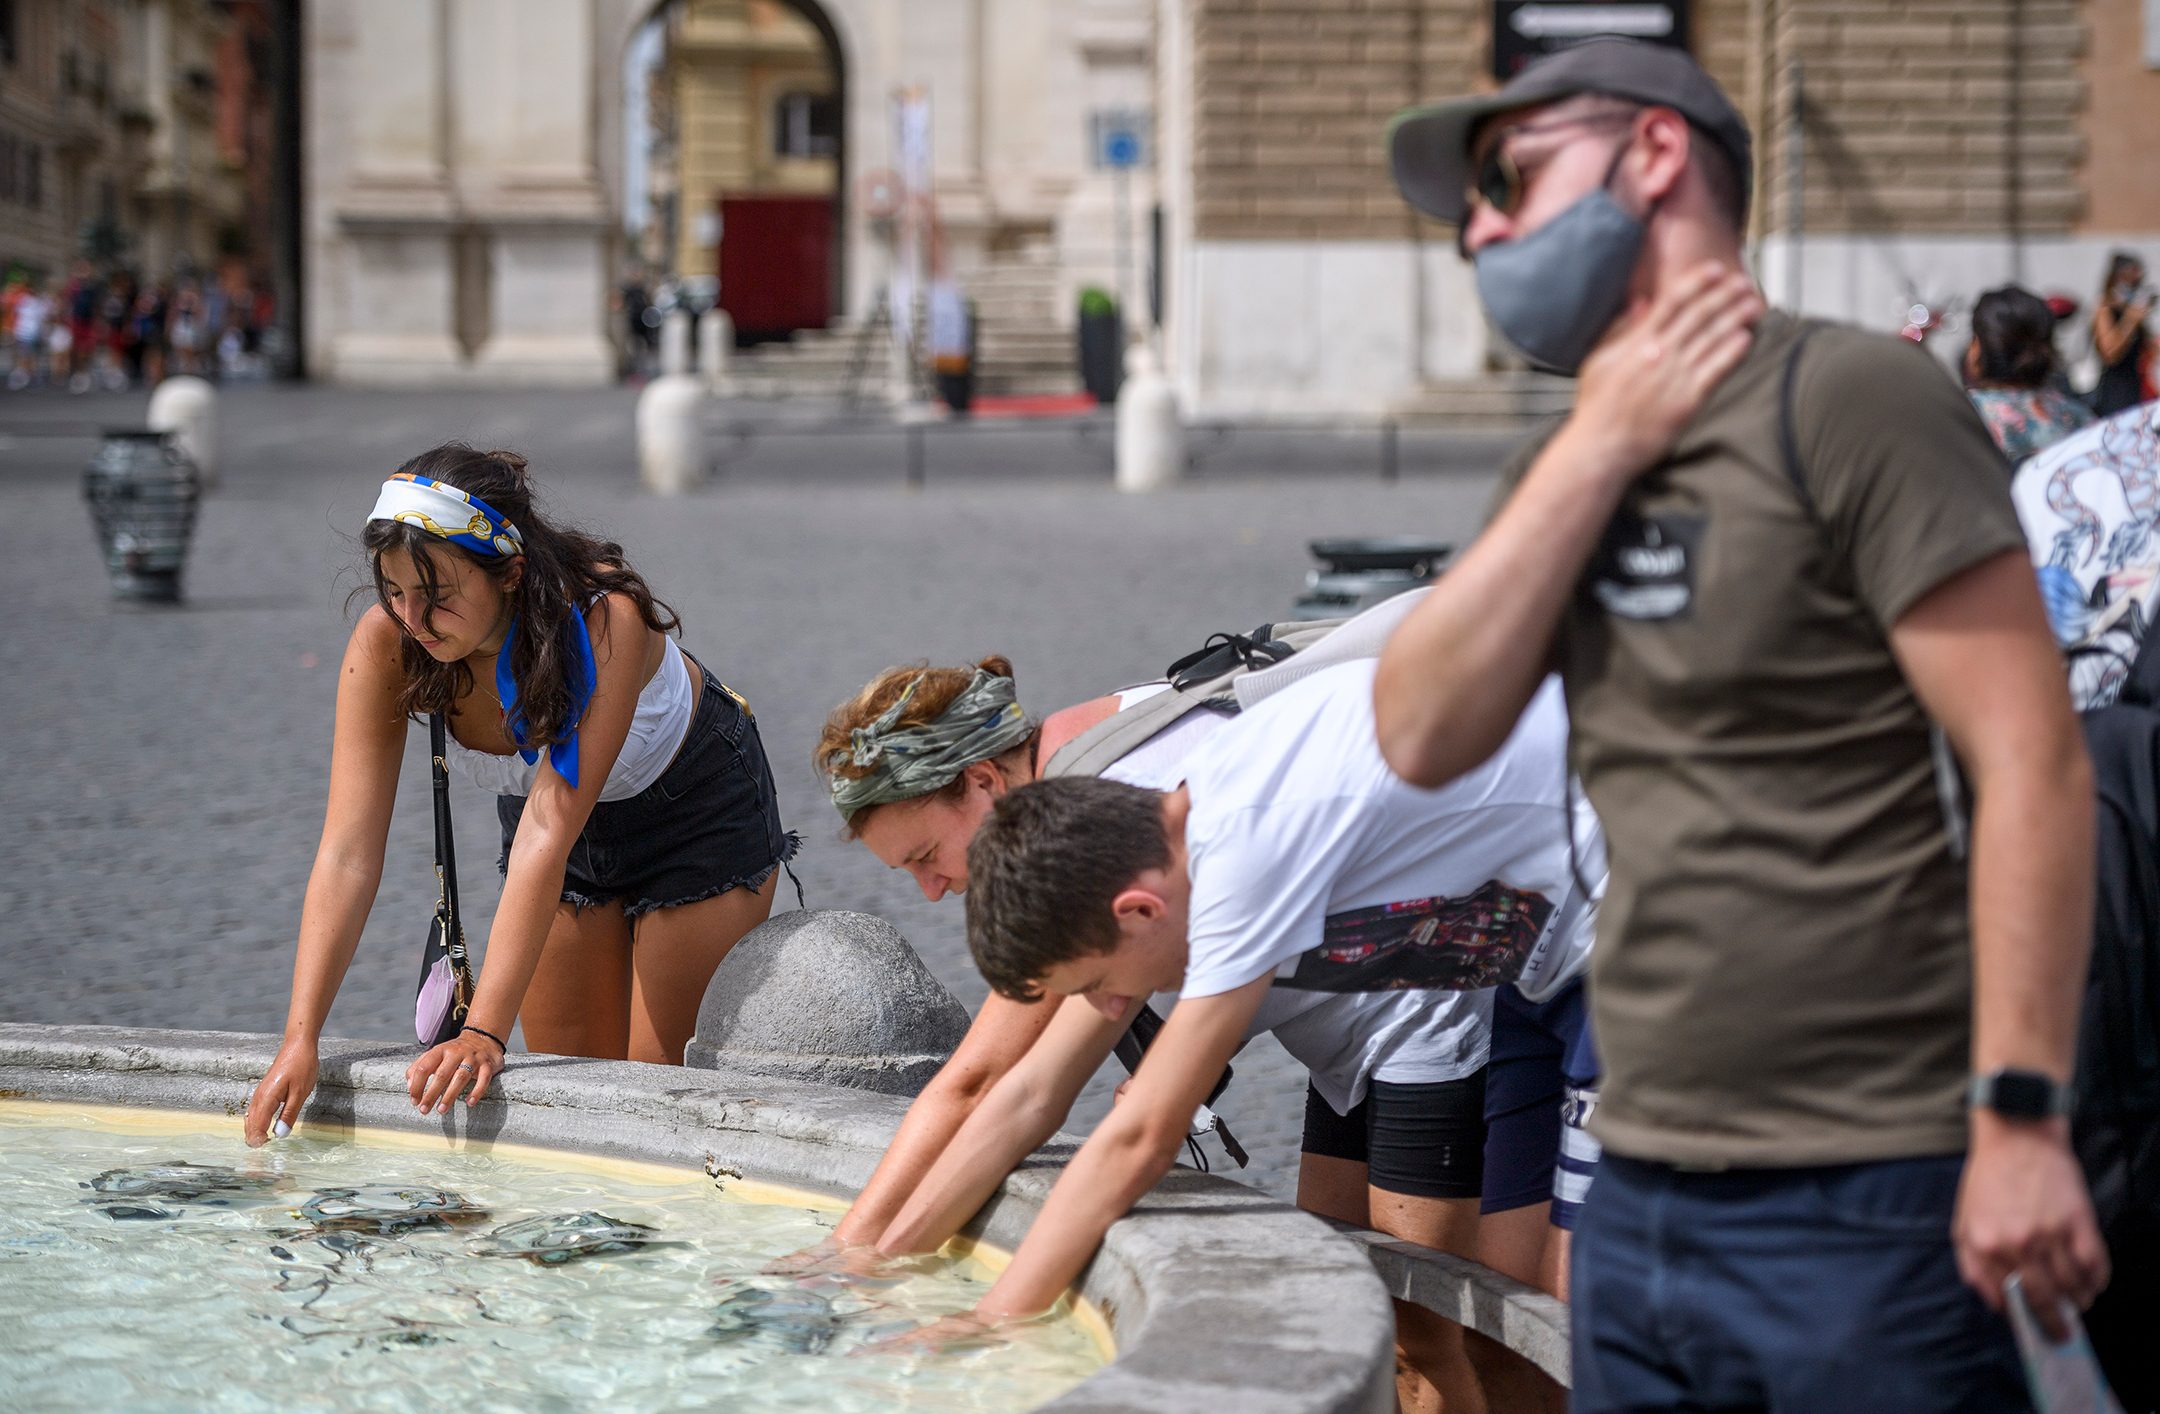 There people, one man and two women, reach their hands into a fountain while a second man slaps water on his neck